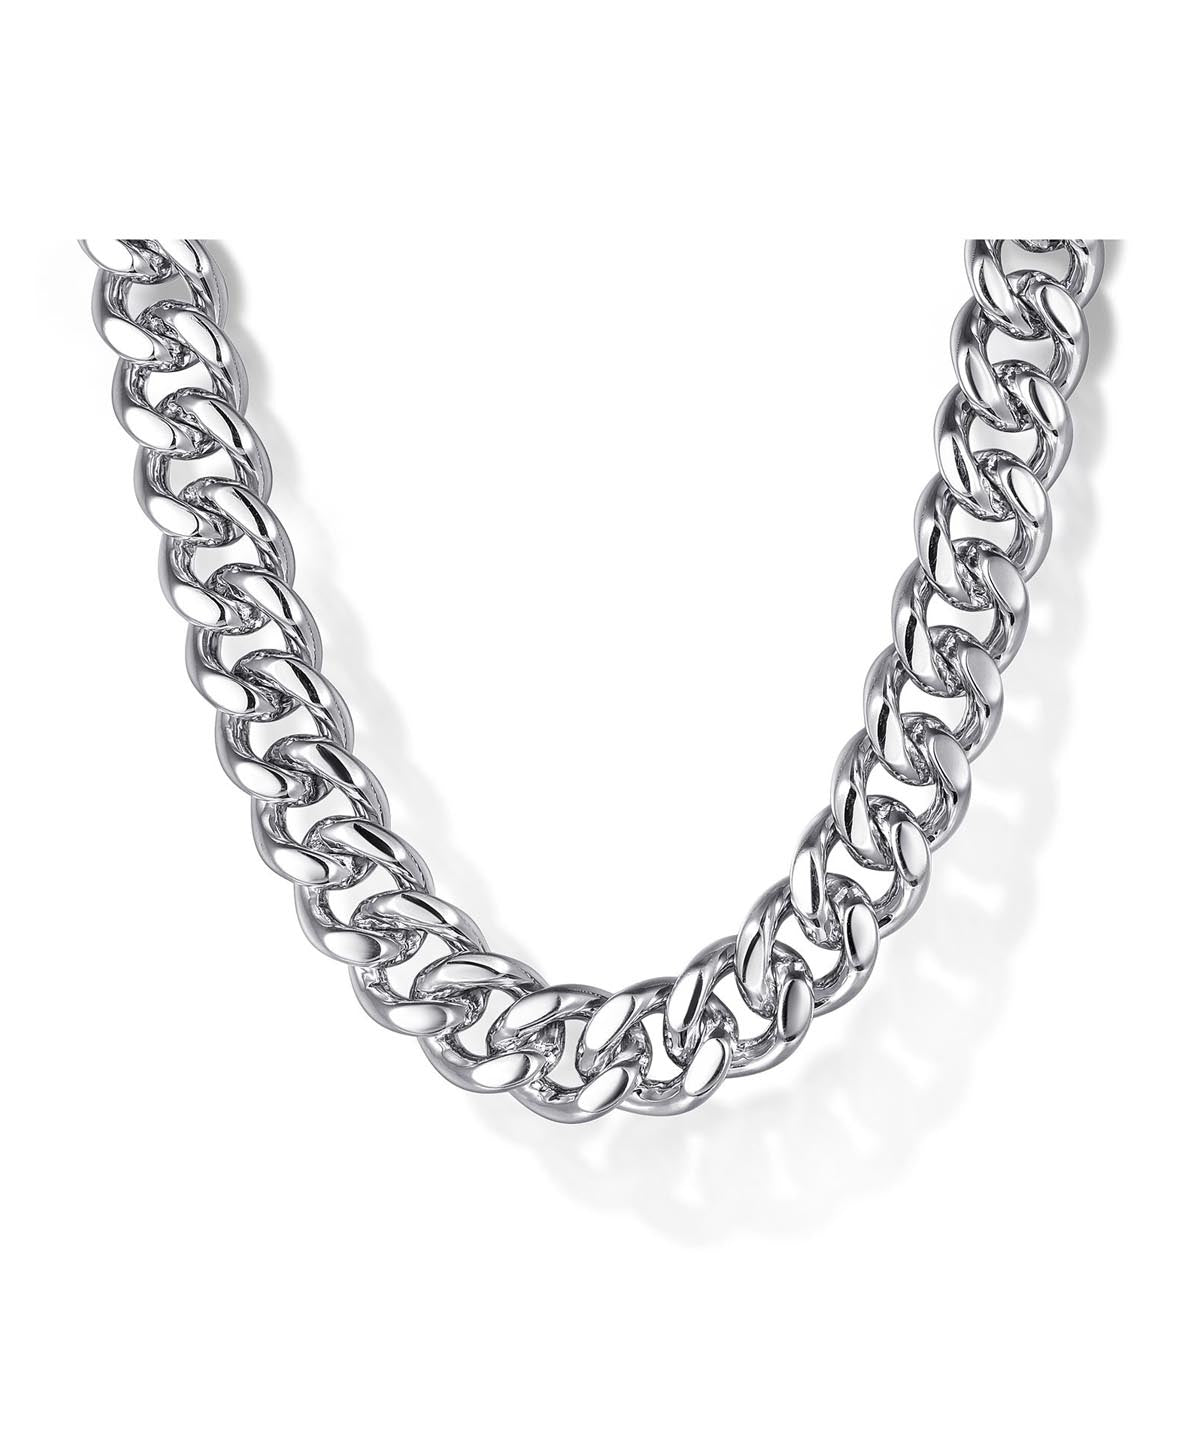 22 Inch 7mm 925 Sterling Silver Men's Link Chain with Diamond Cut Necklace